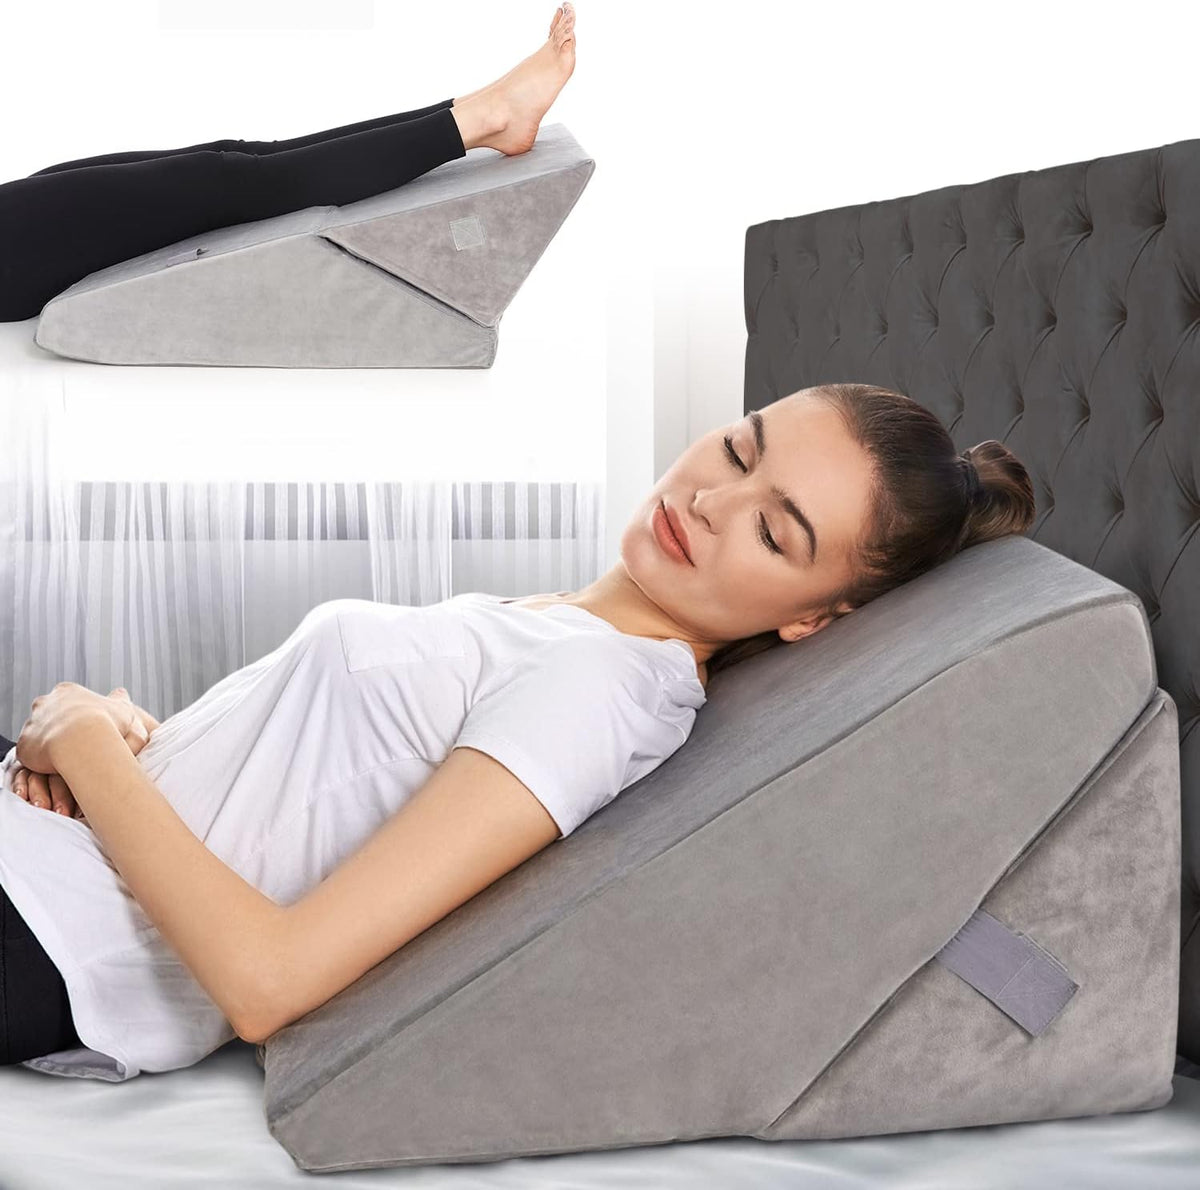 L'AGRATY 3pcs Orthopedic Bed Wedge Pillow Set,12-in-1,Post Surgery Foam  Pillow for Neck, Back and Leg Pain Relief,Anti Snoring,Adjustable Triangle